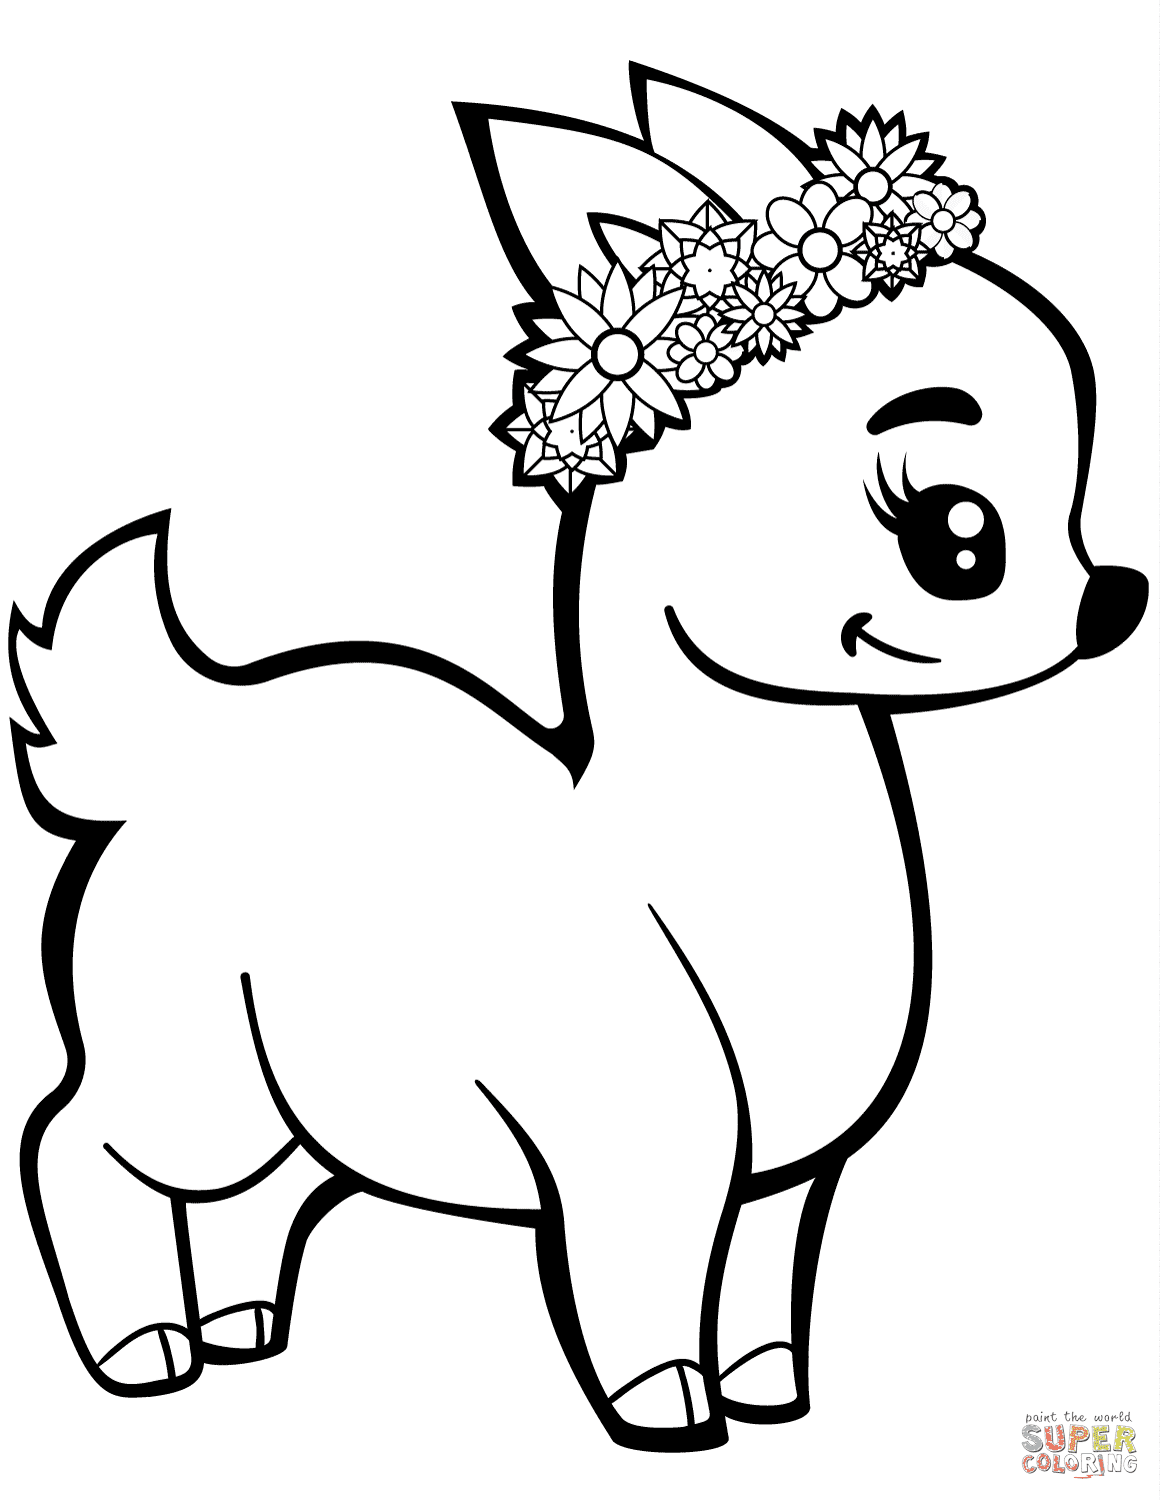 Fawn with a Wreath Coloring Page